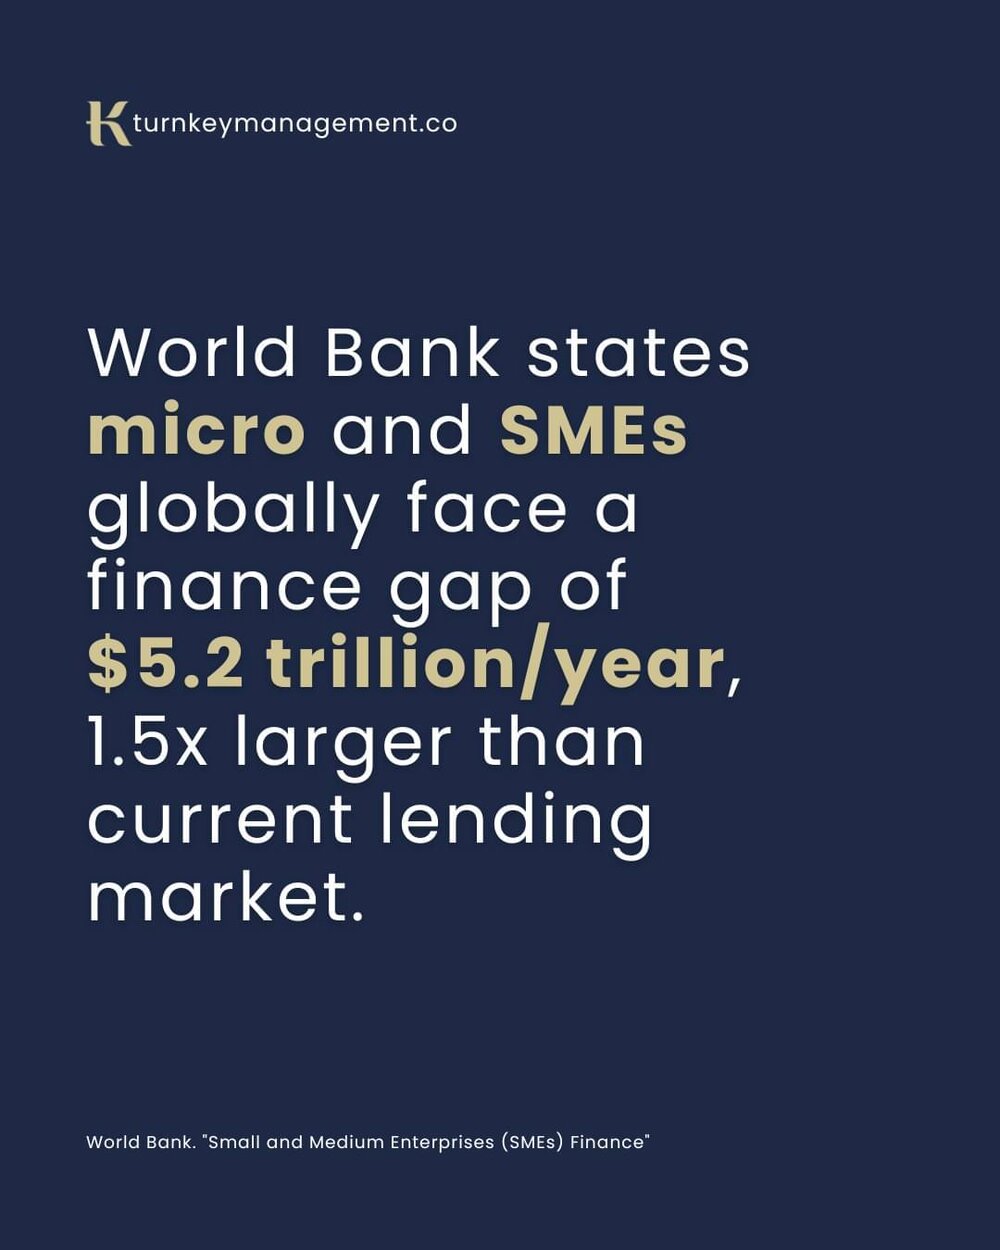 At first glance? Scary stat. But it's not all doom and gloom by any means.

While this #challenge is primarily relevant to #SMEs and micro-enterprises (particularly those in emerging markets), #effective and #proactive #debt #management can mean the 